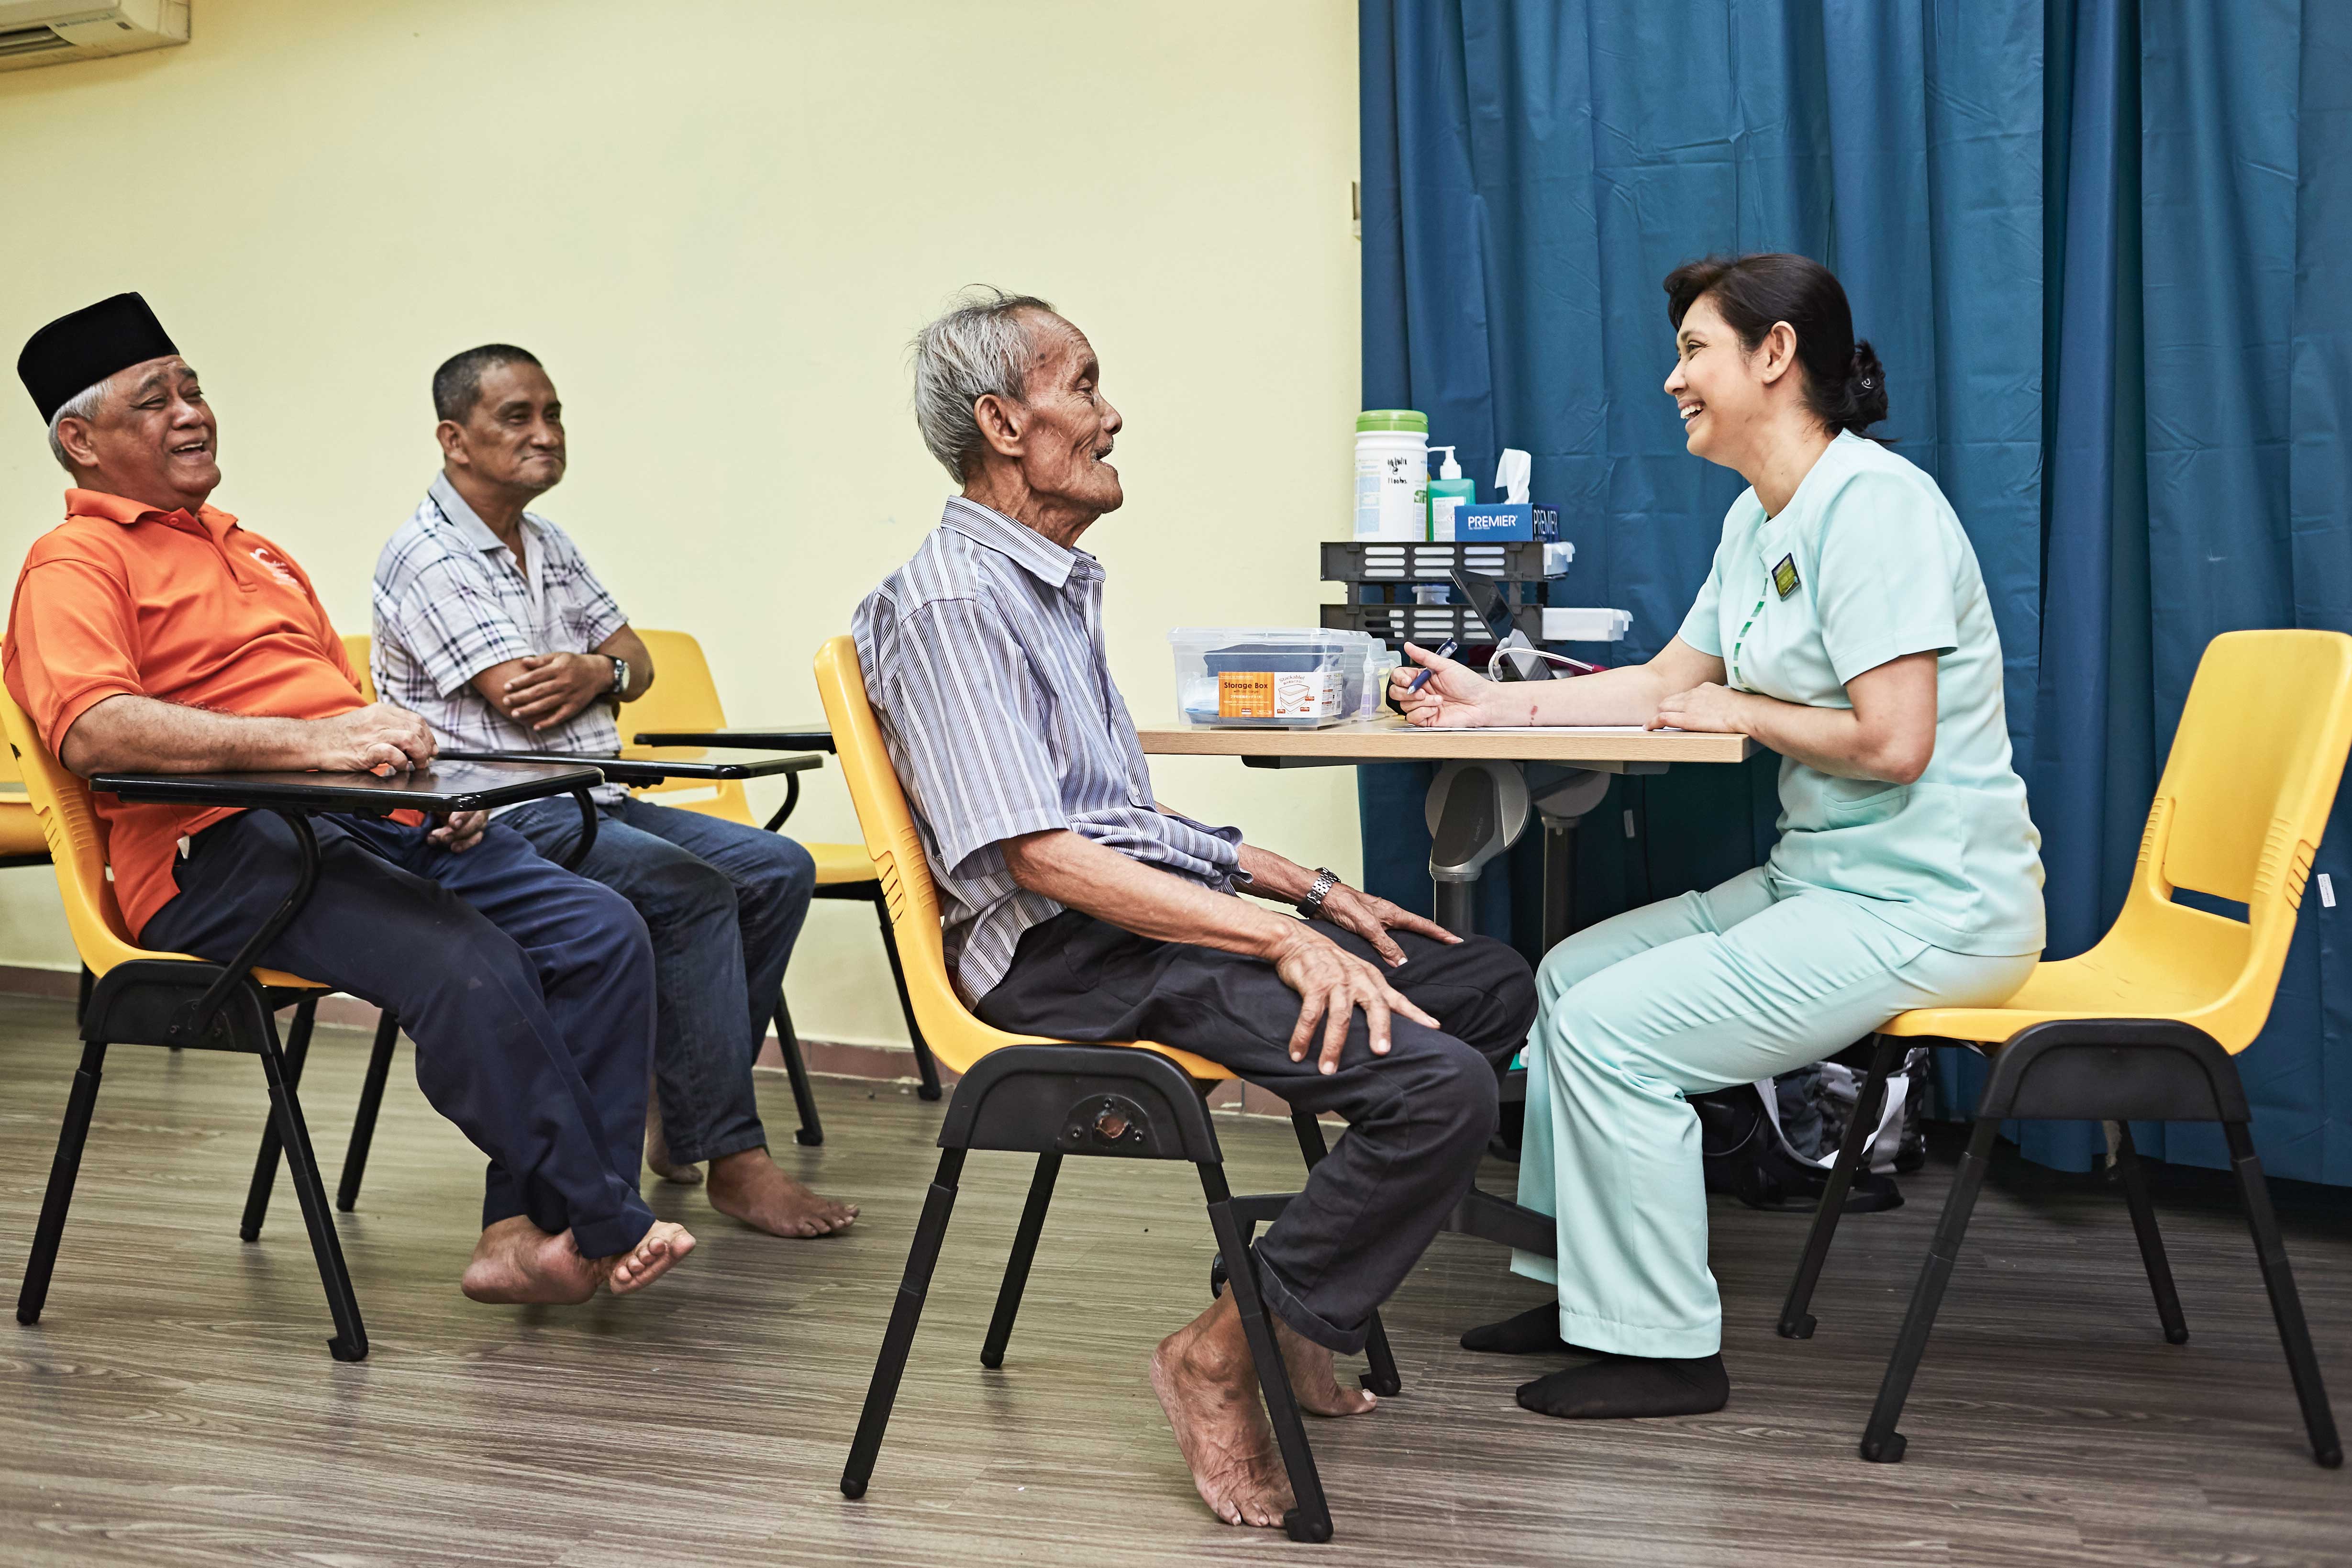 SGH pulls together organisations in the community as partners in health. Together, they create a strong safety net for residents and patients, ensuring they stay healthy and age well at home.